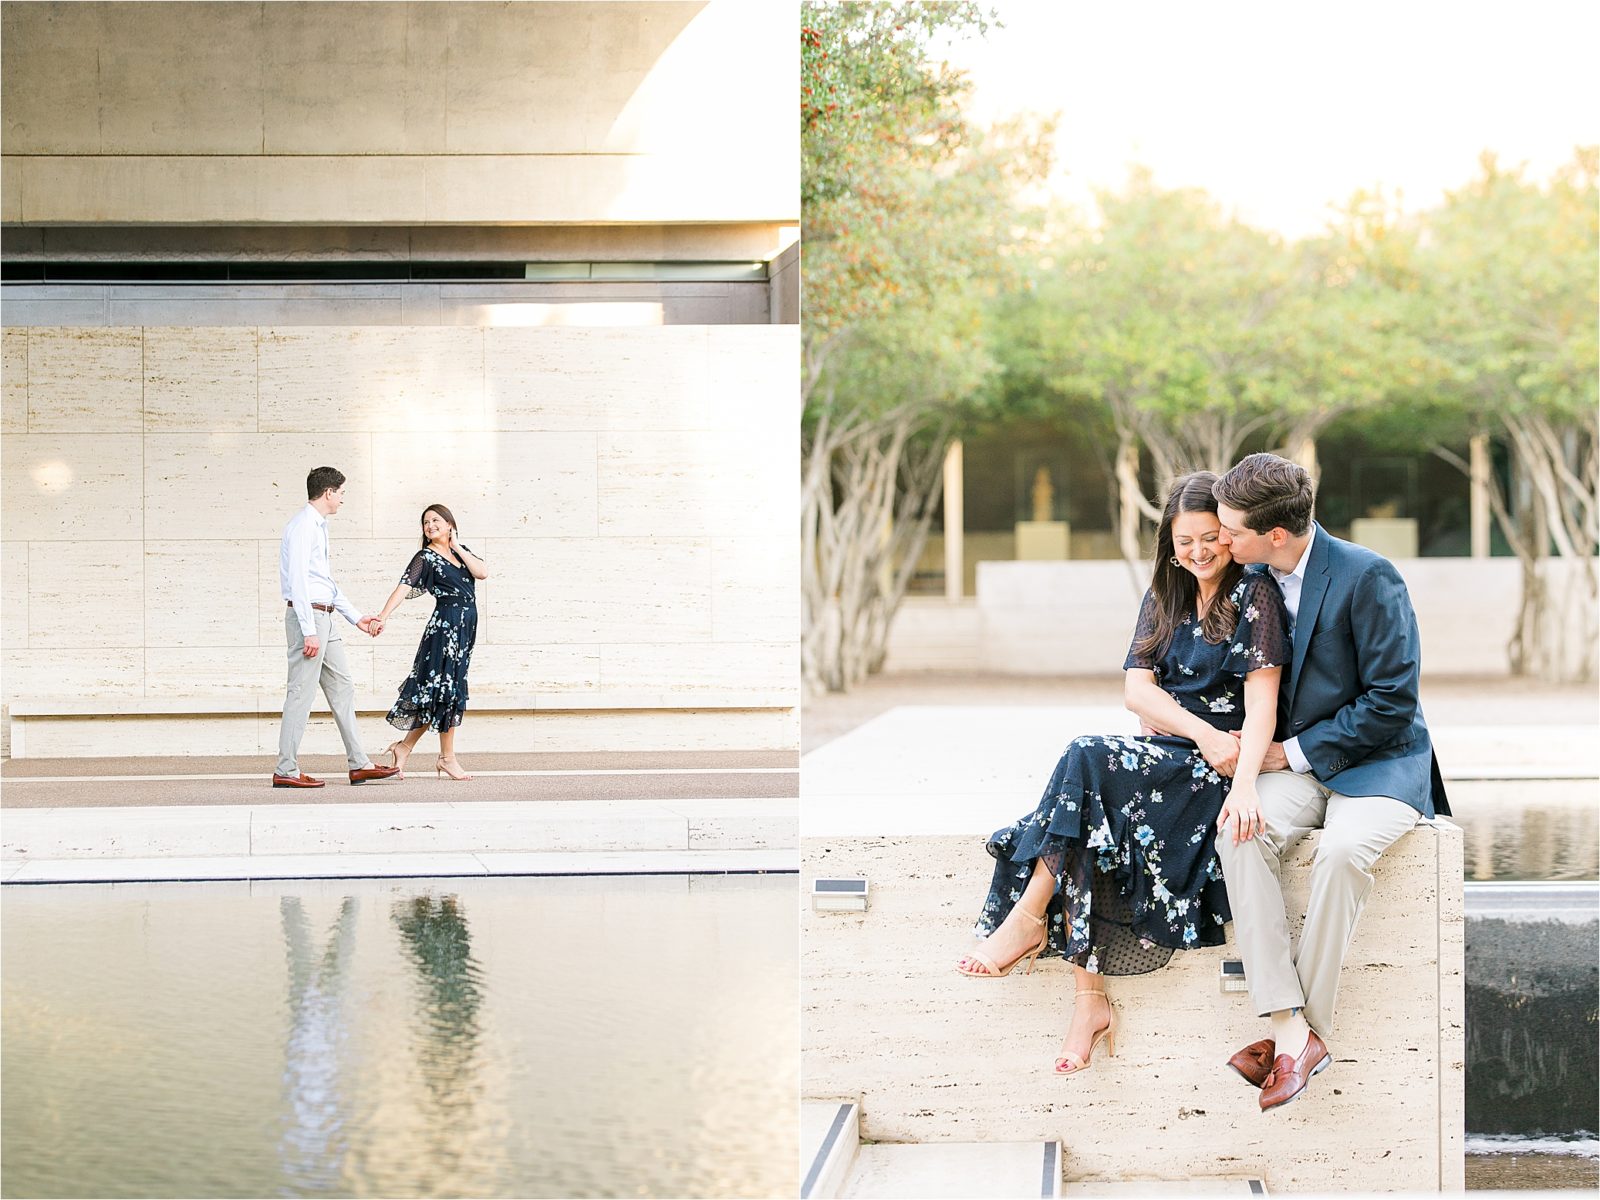 A couple holds hands in front of the reflecting pond at The Kimball Art Museum in Fort Worth, Texas